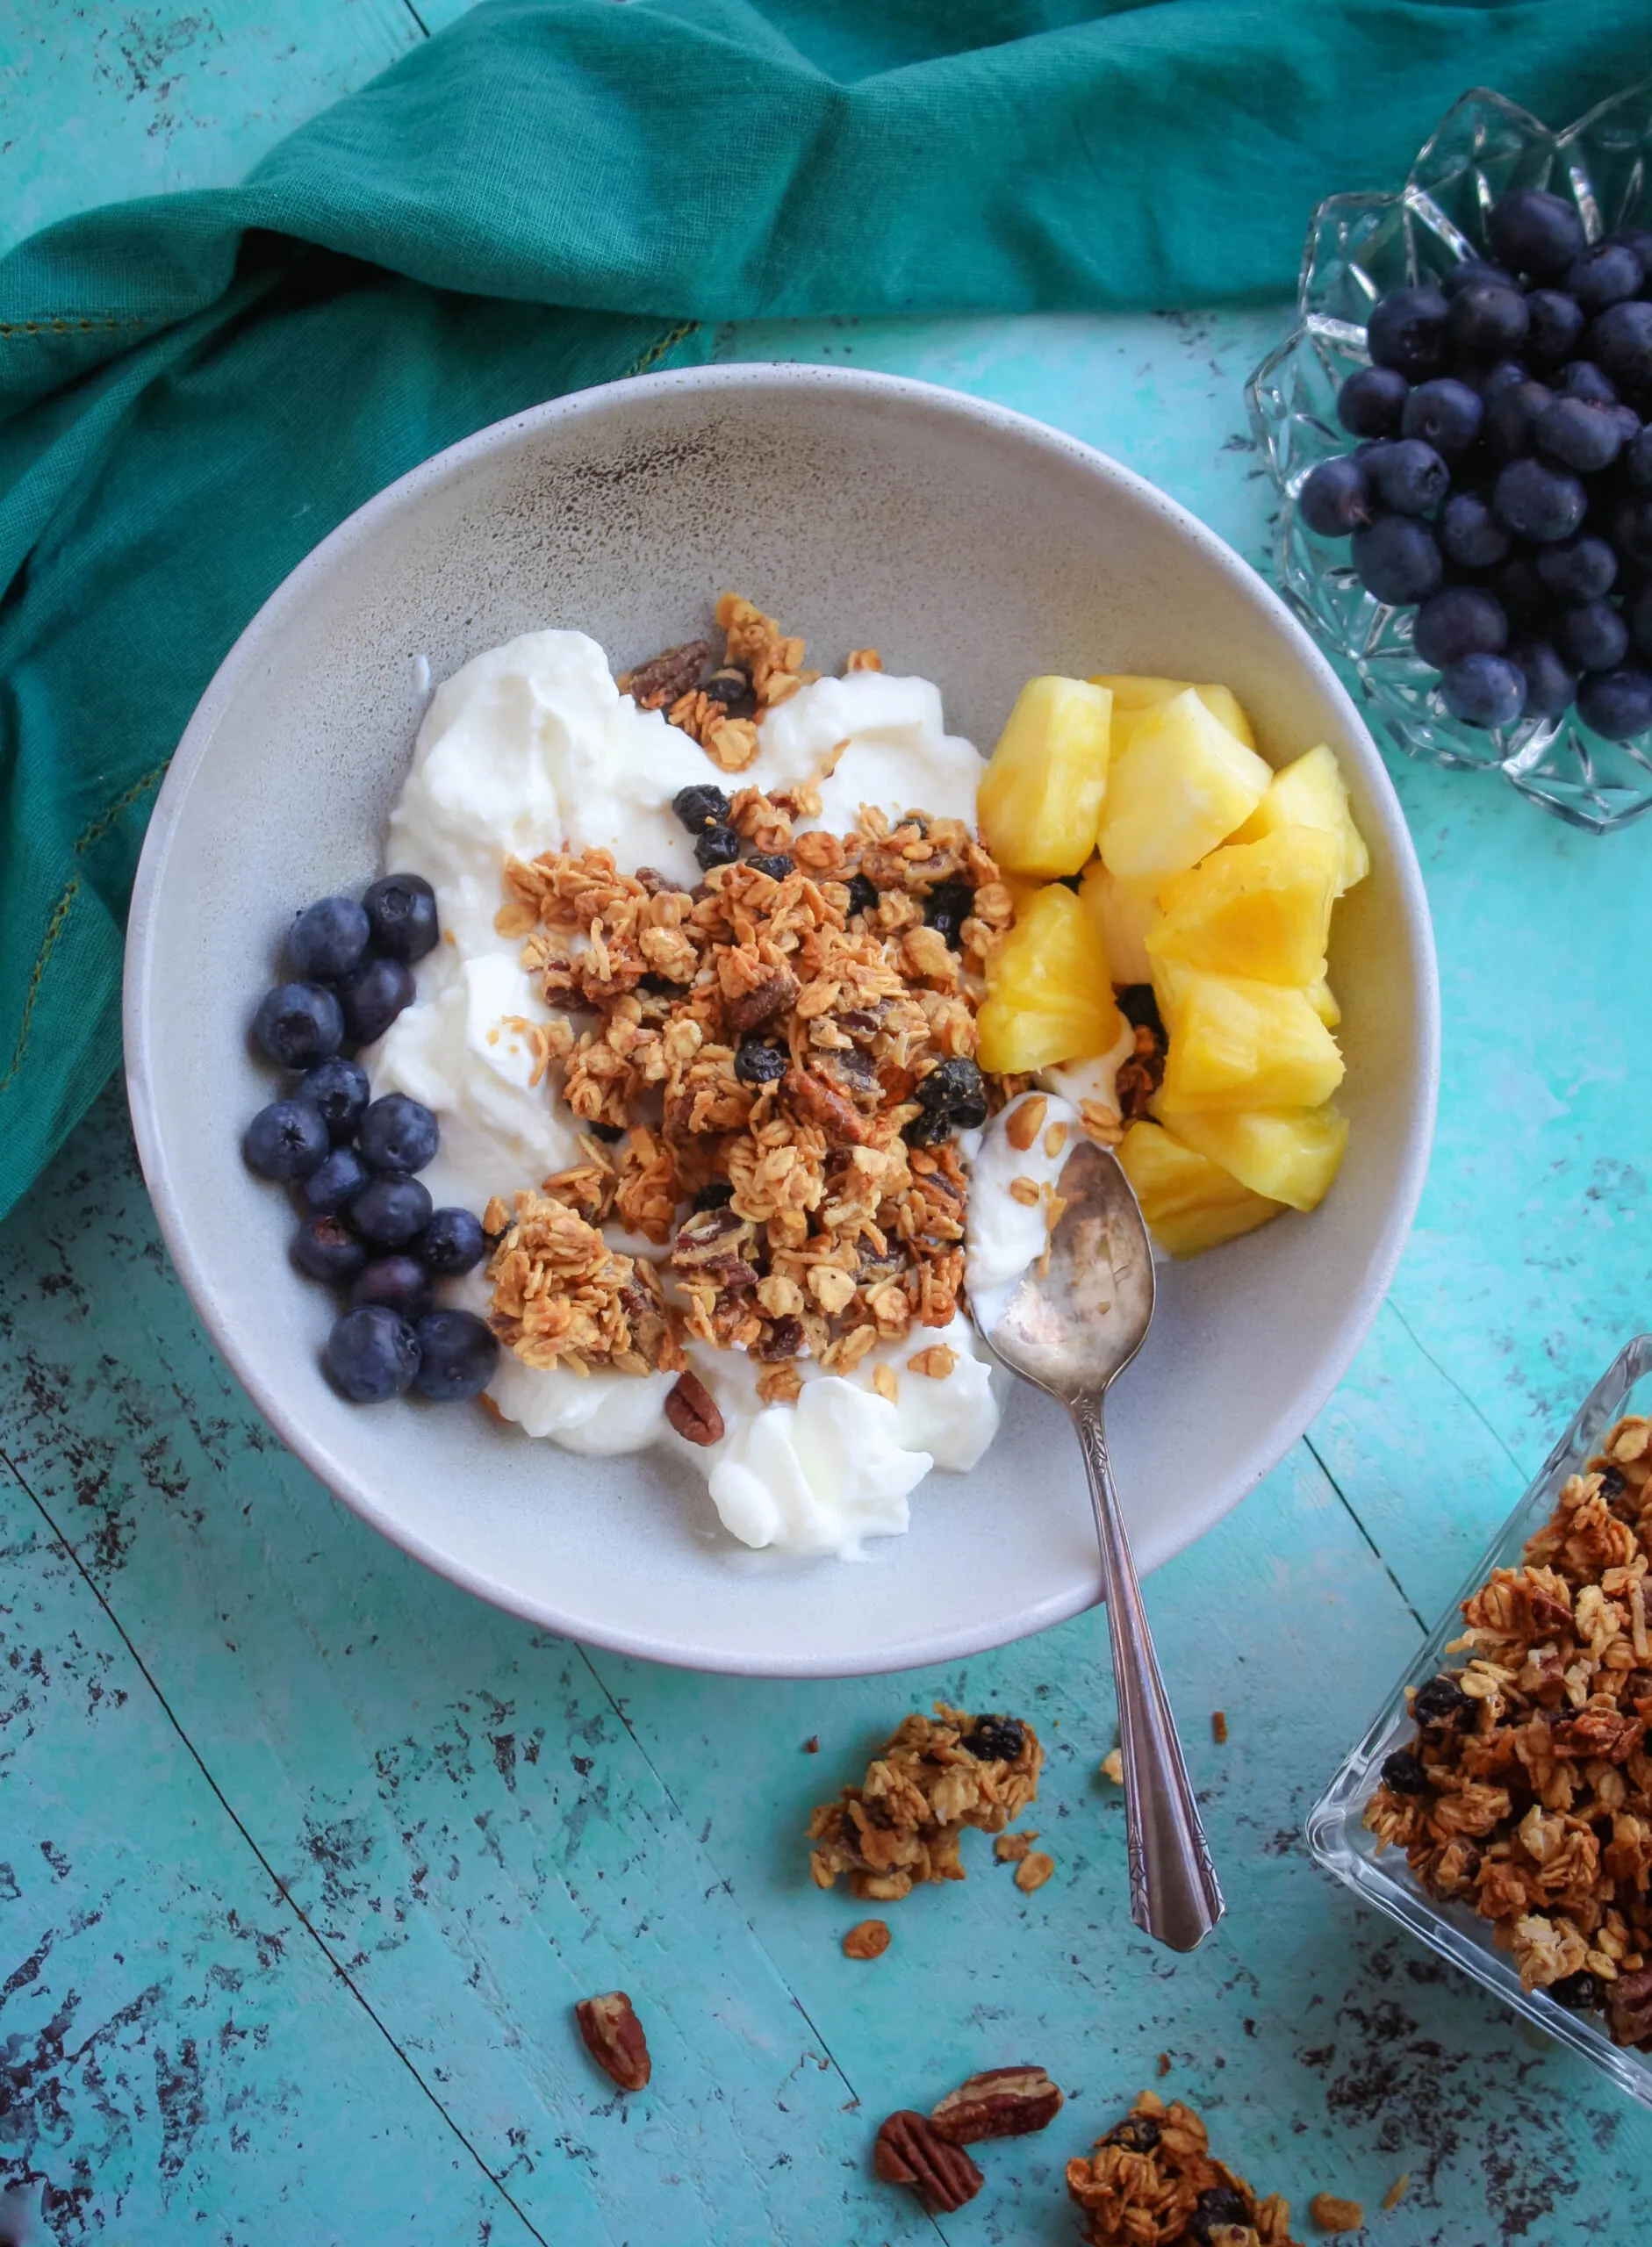 Looking down on a bowl of plain yogurt with granola and fruit.